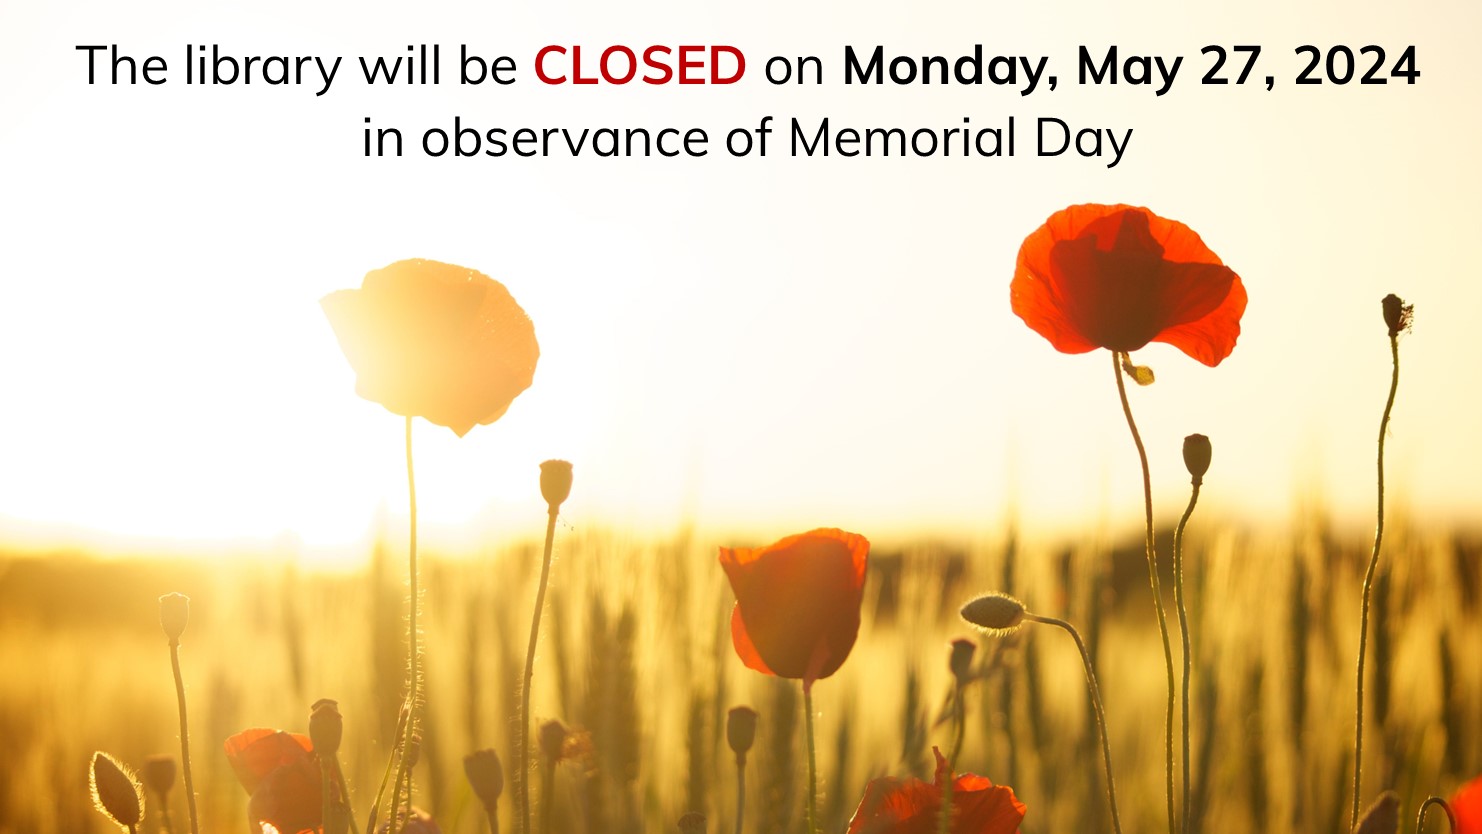 The library will be closed on Monday, May 27, 2024 in observance of Memorial Day